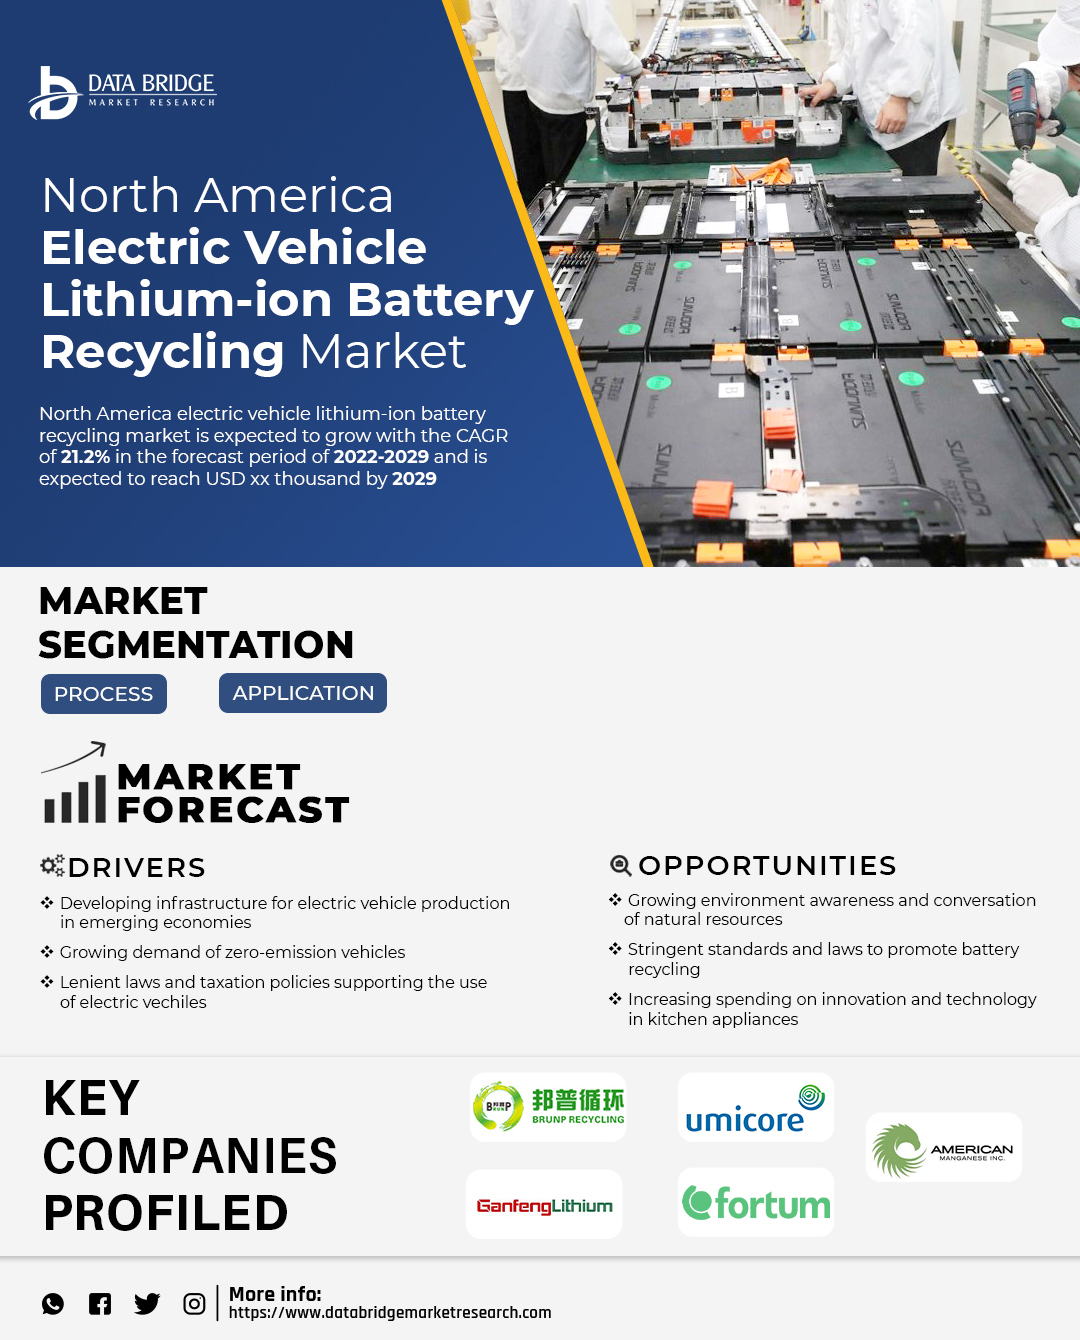 North America Electric Vehicle Lithium-Ion Battery Recycling Market